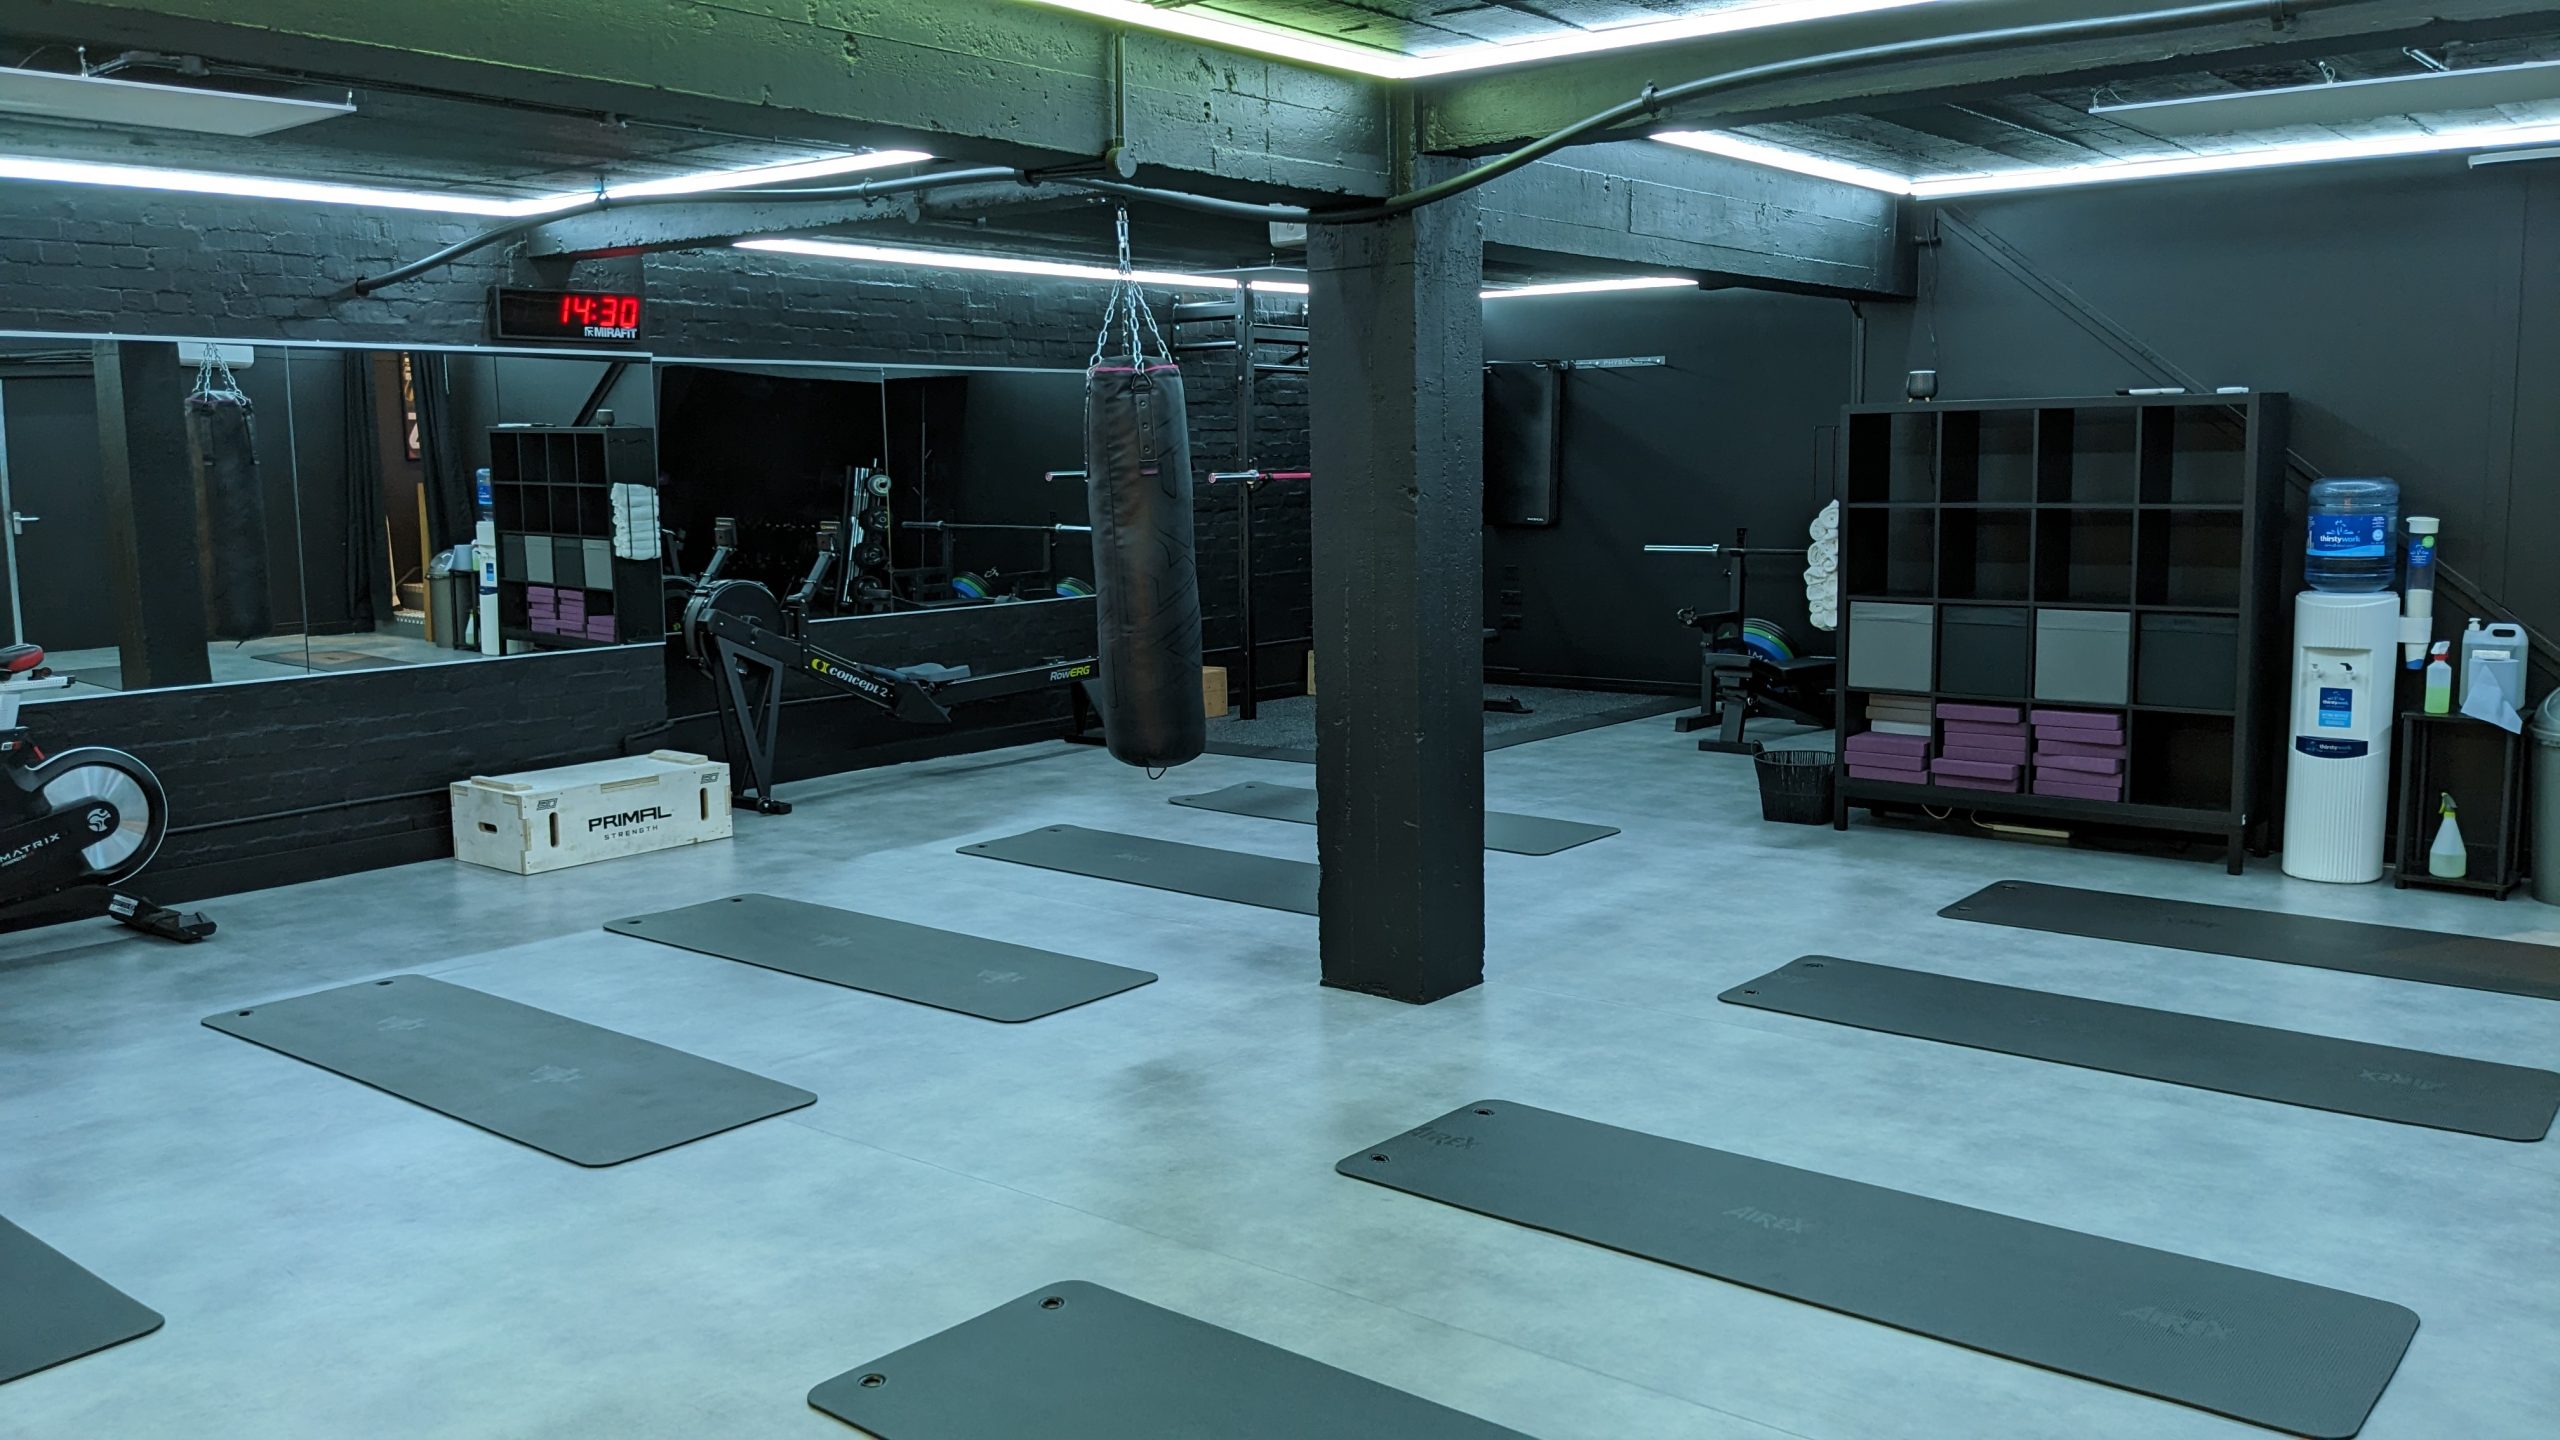 gym space set up for exercise class